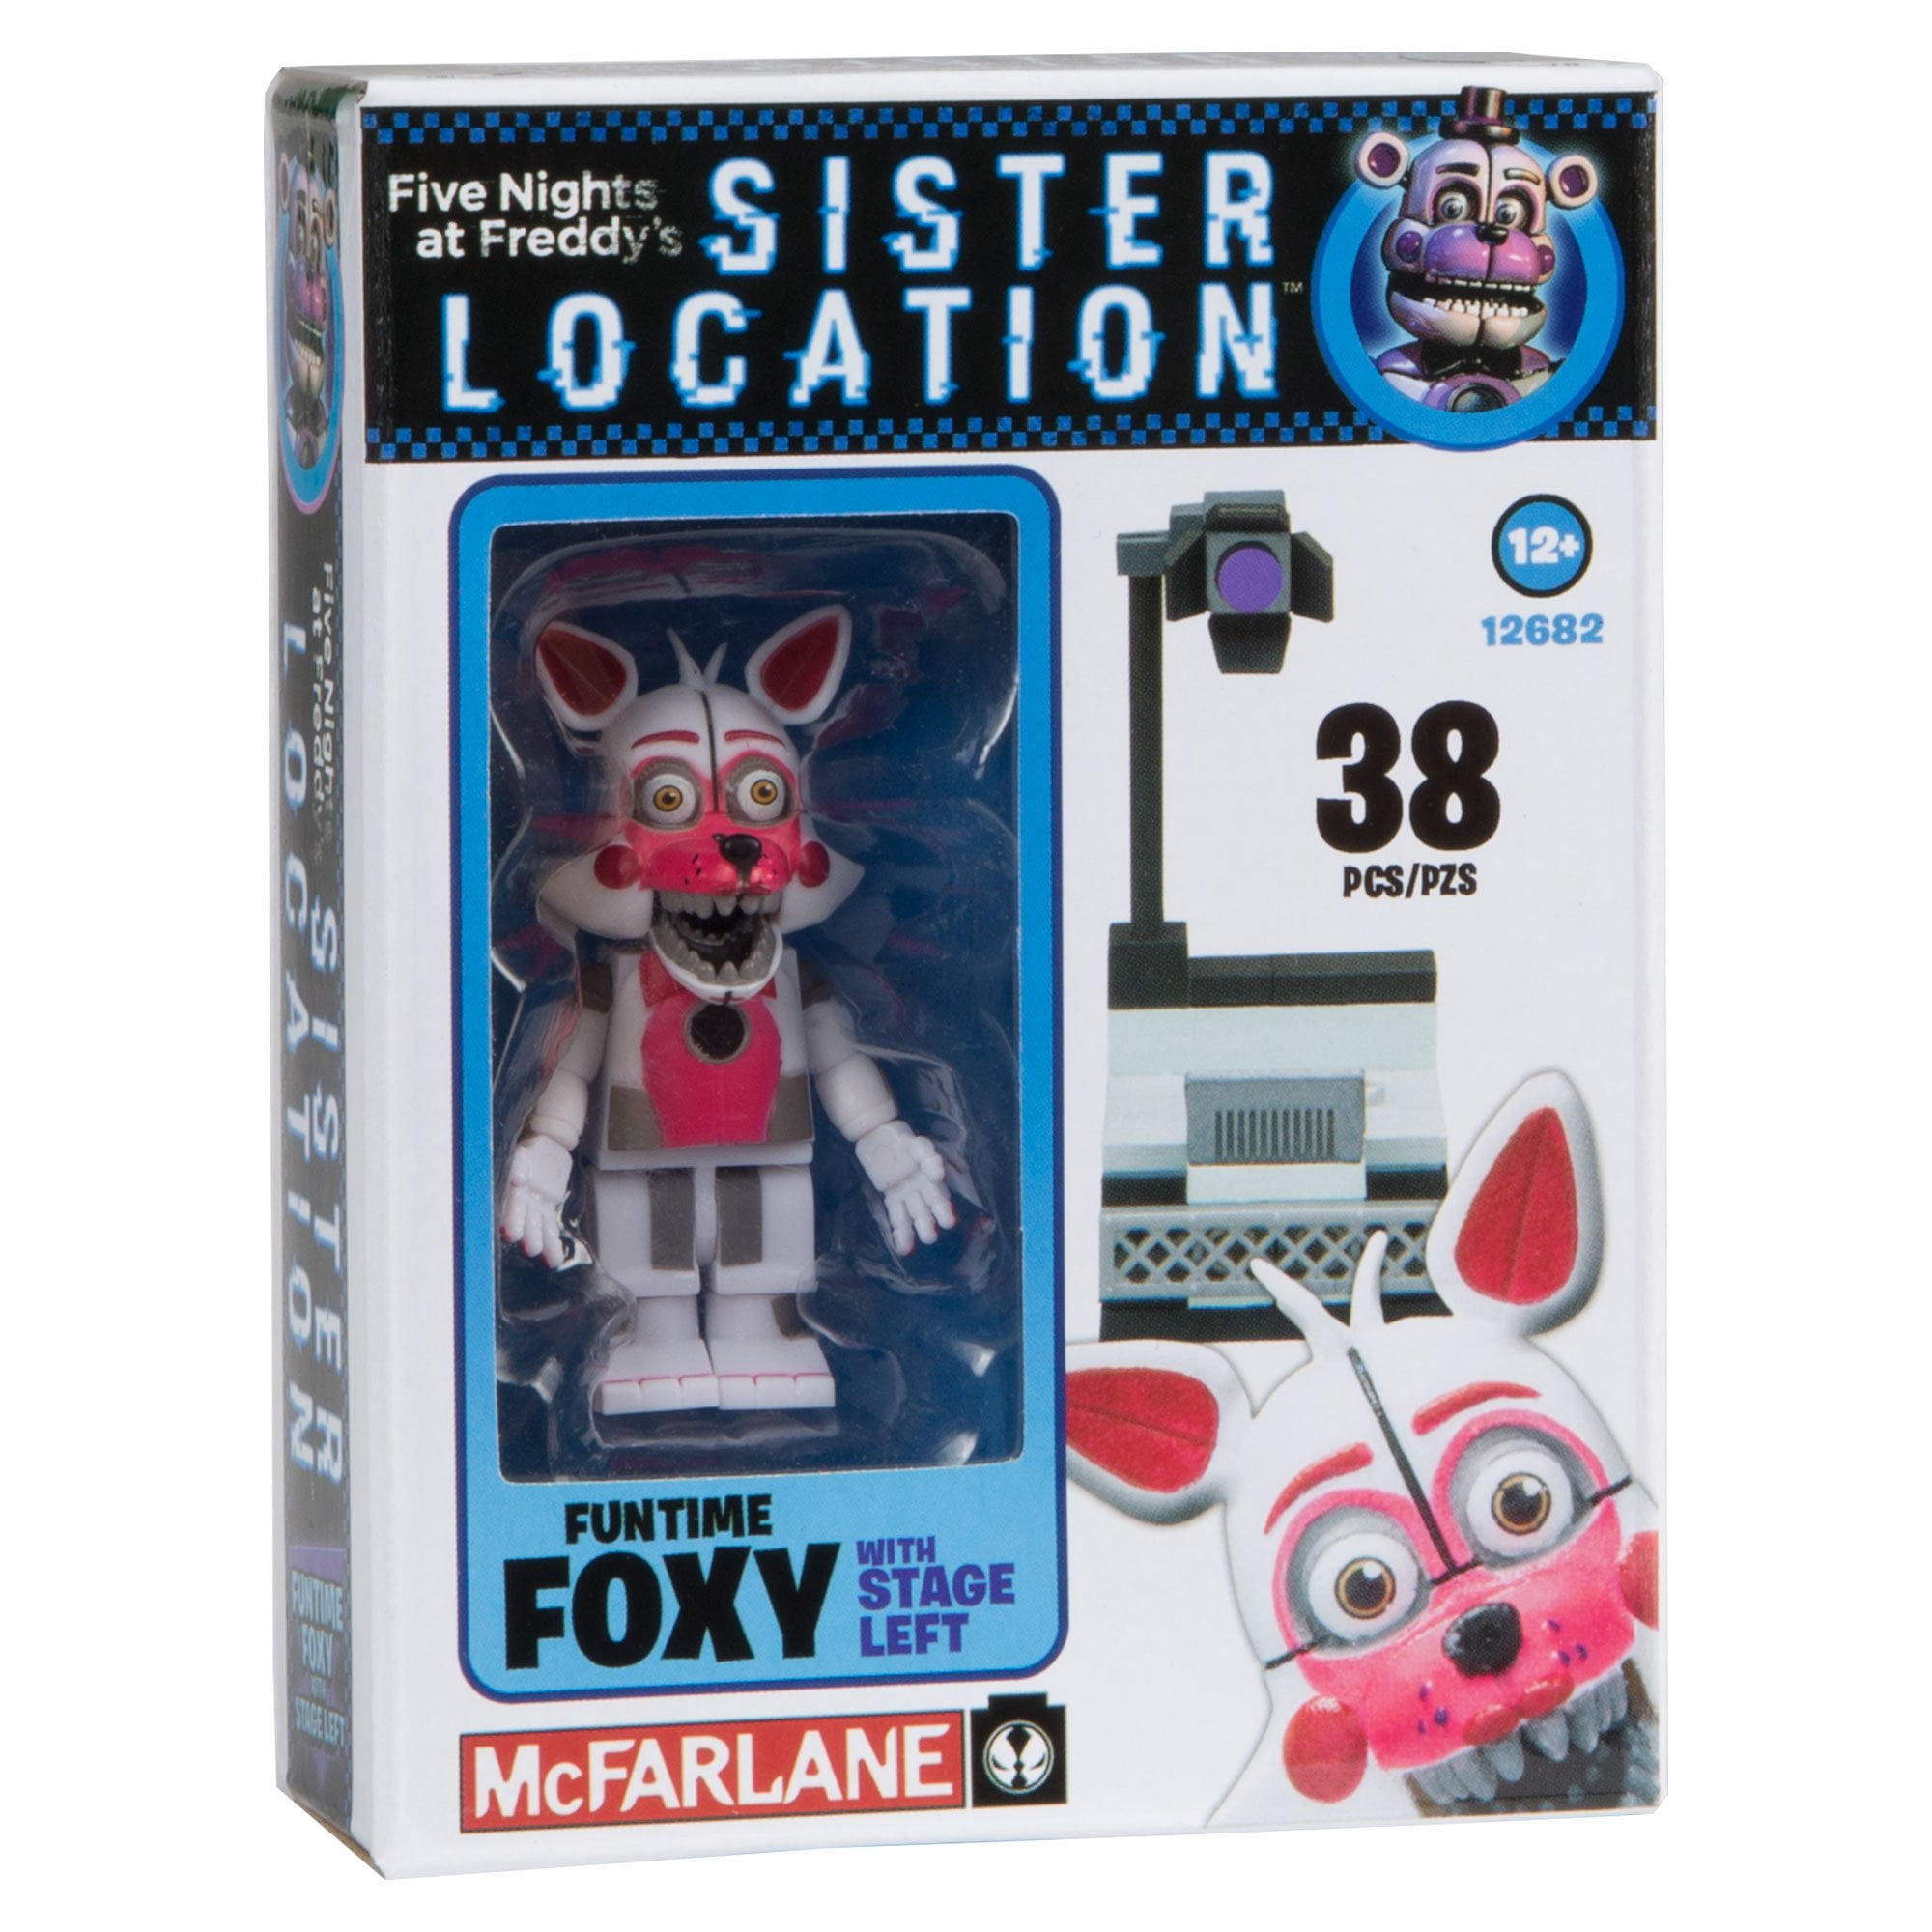 where can i buy five nights at freddy's toys